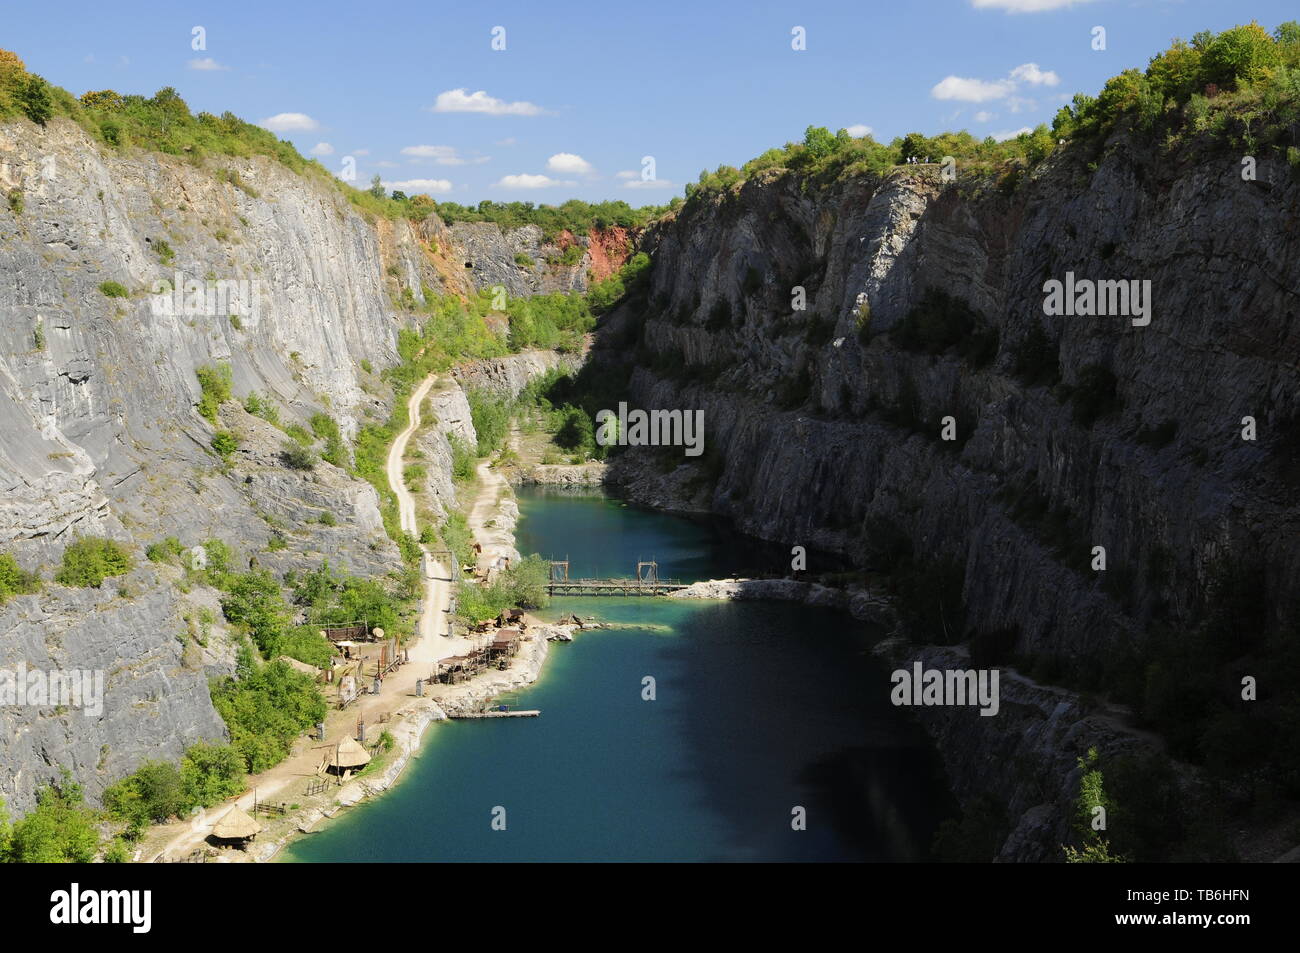 Big America, Czech Grand Canyon, is a partly flooded, abandoned limestone quarry near Morina village, Central Bohemian Region, Czech Republic, August  Stock Photo